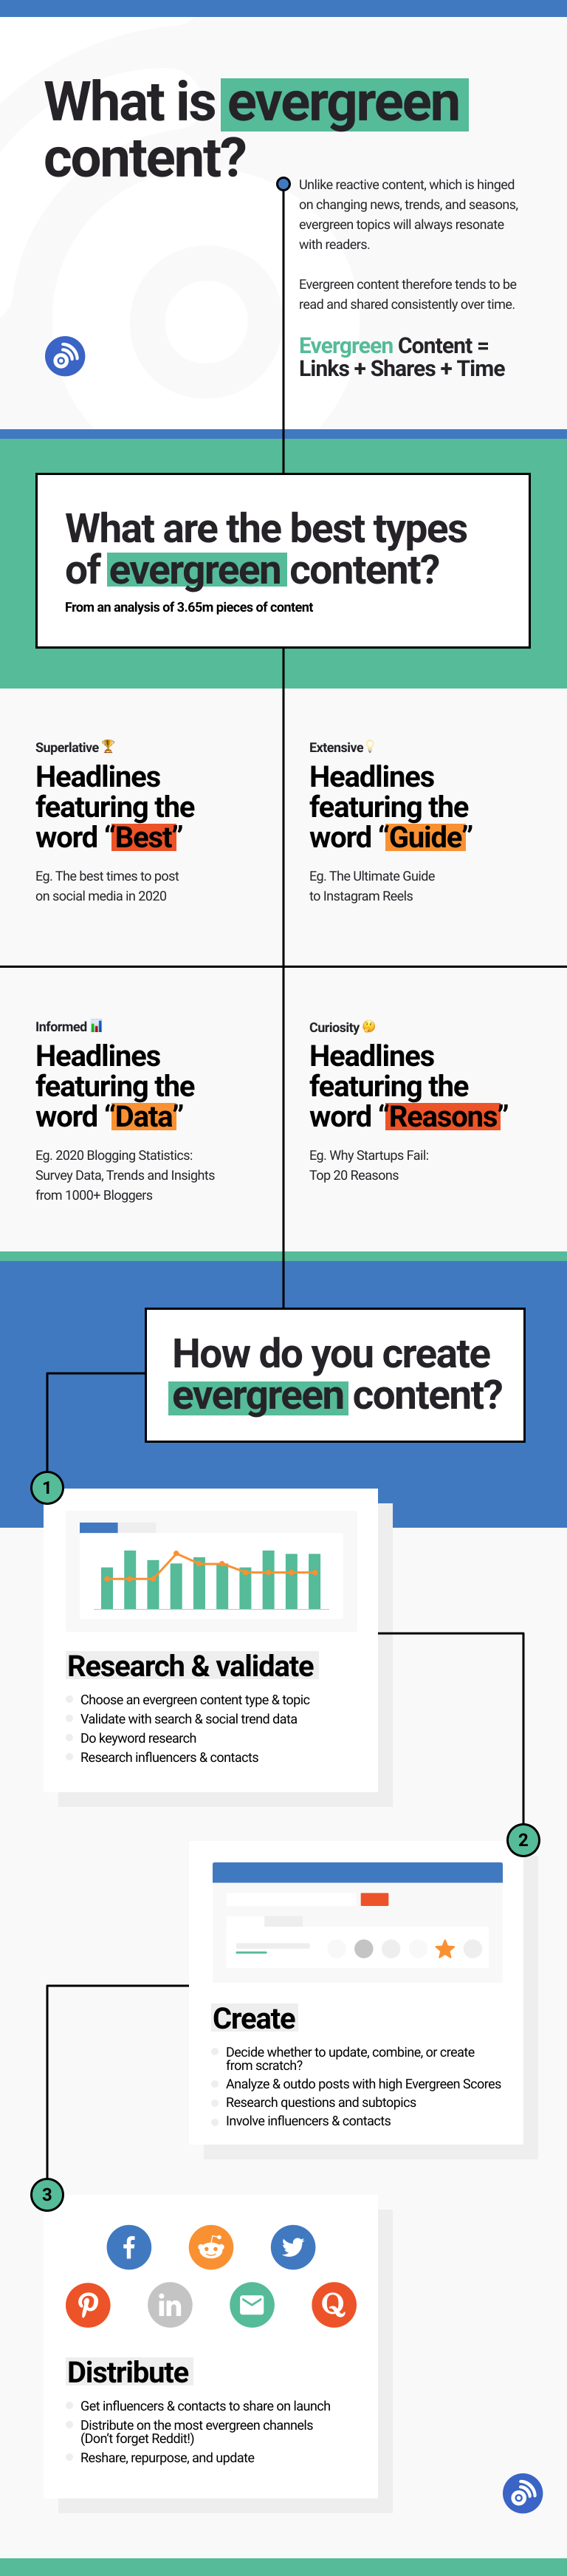 buzzsumo shares new insights on how to create evergreen content infographic